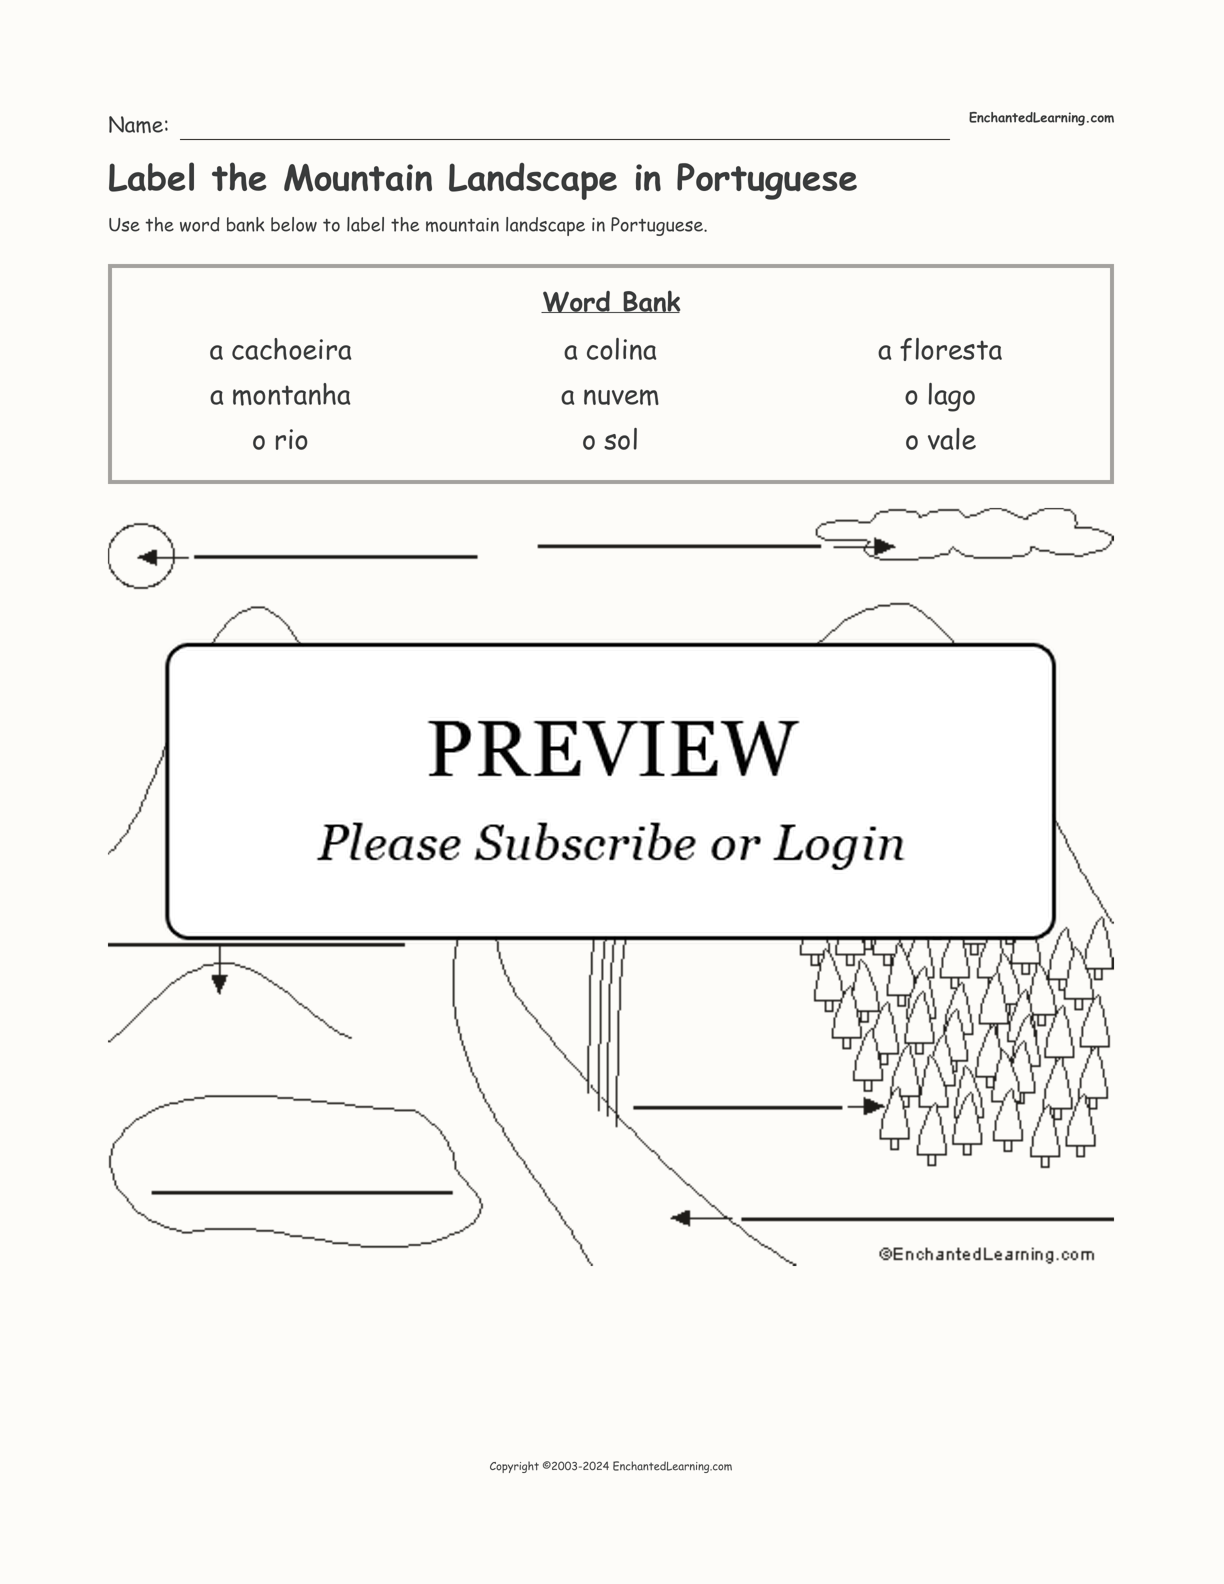 Label the Mountain Landscape in Portuguese interactive worksheet page 1